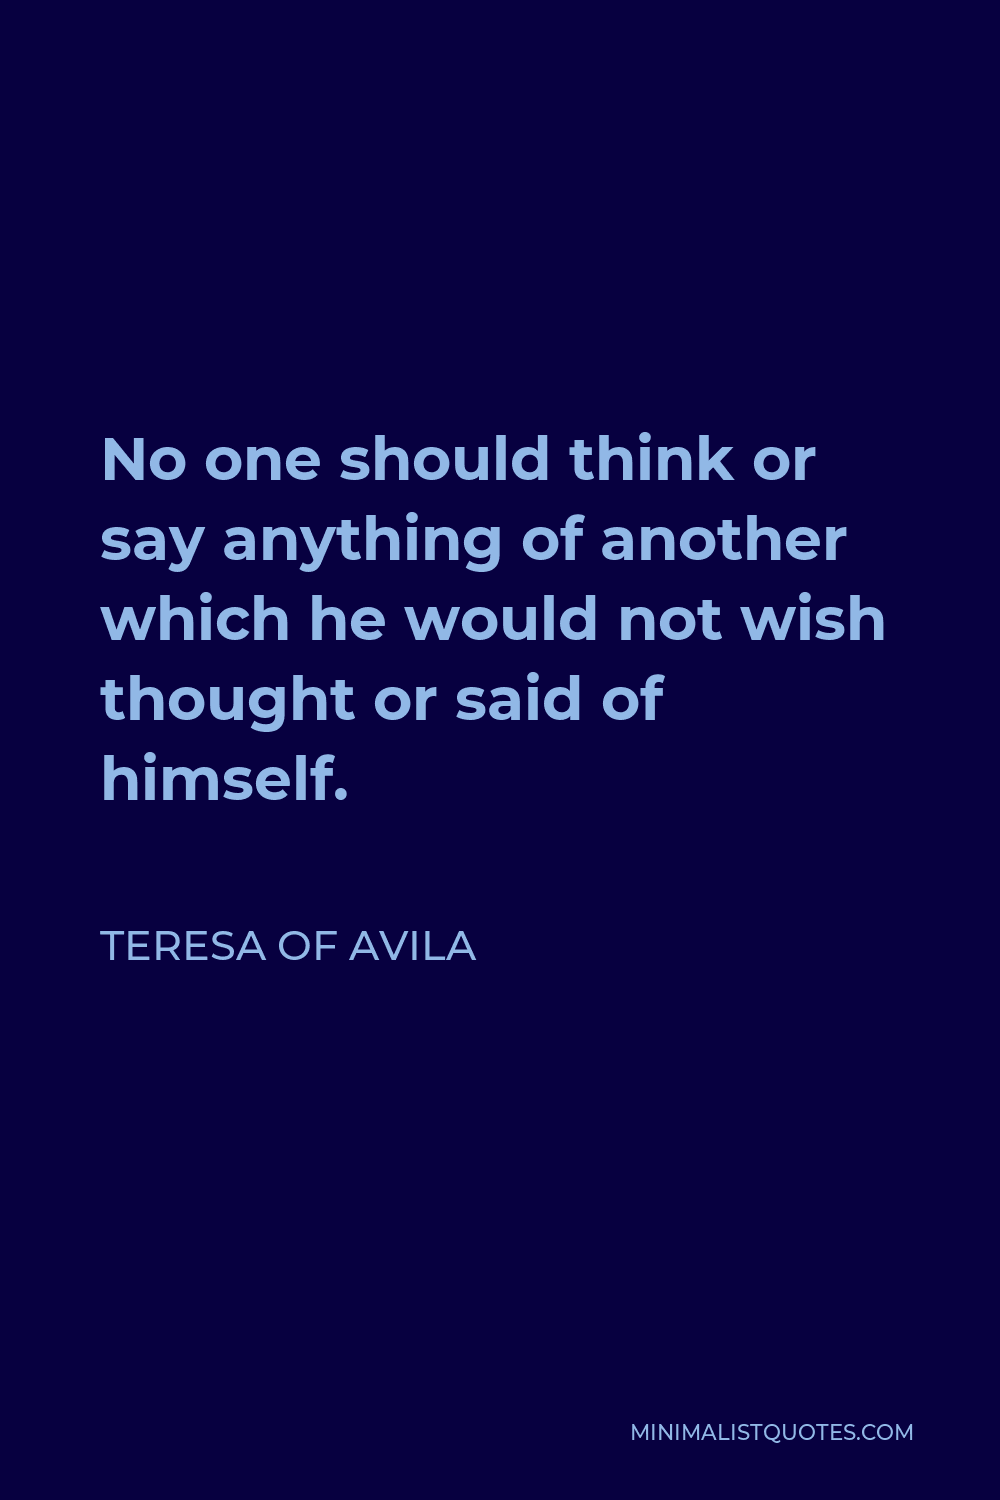 Teresa of Avila Quote - No one should think or say anything of another which he would not wish thought or said of himself.